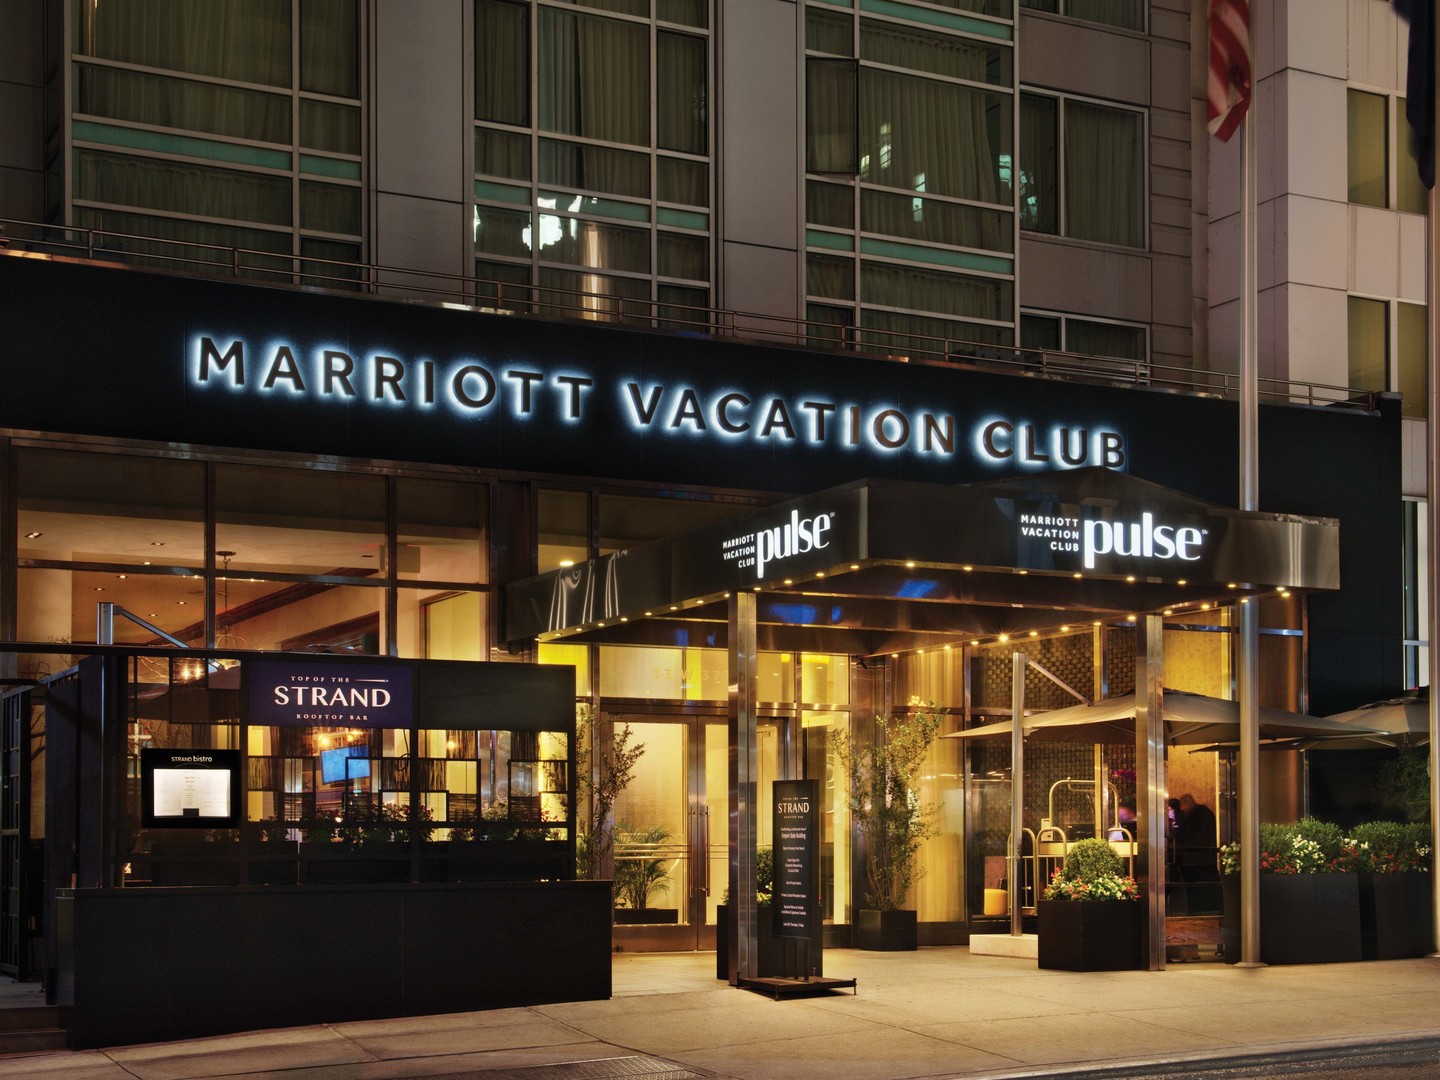 Marriott Vacation Club Pulse<span class='trademark'>®</span>, New York City Entrance Street View. Marriott Vacation Club Pulse<span class='trademark'>®</span>, New York City is located in New York City, New York United States.